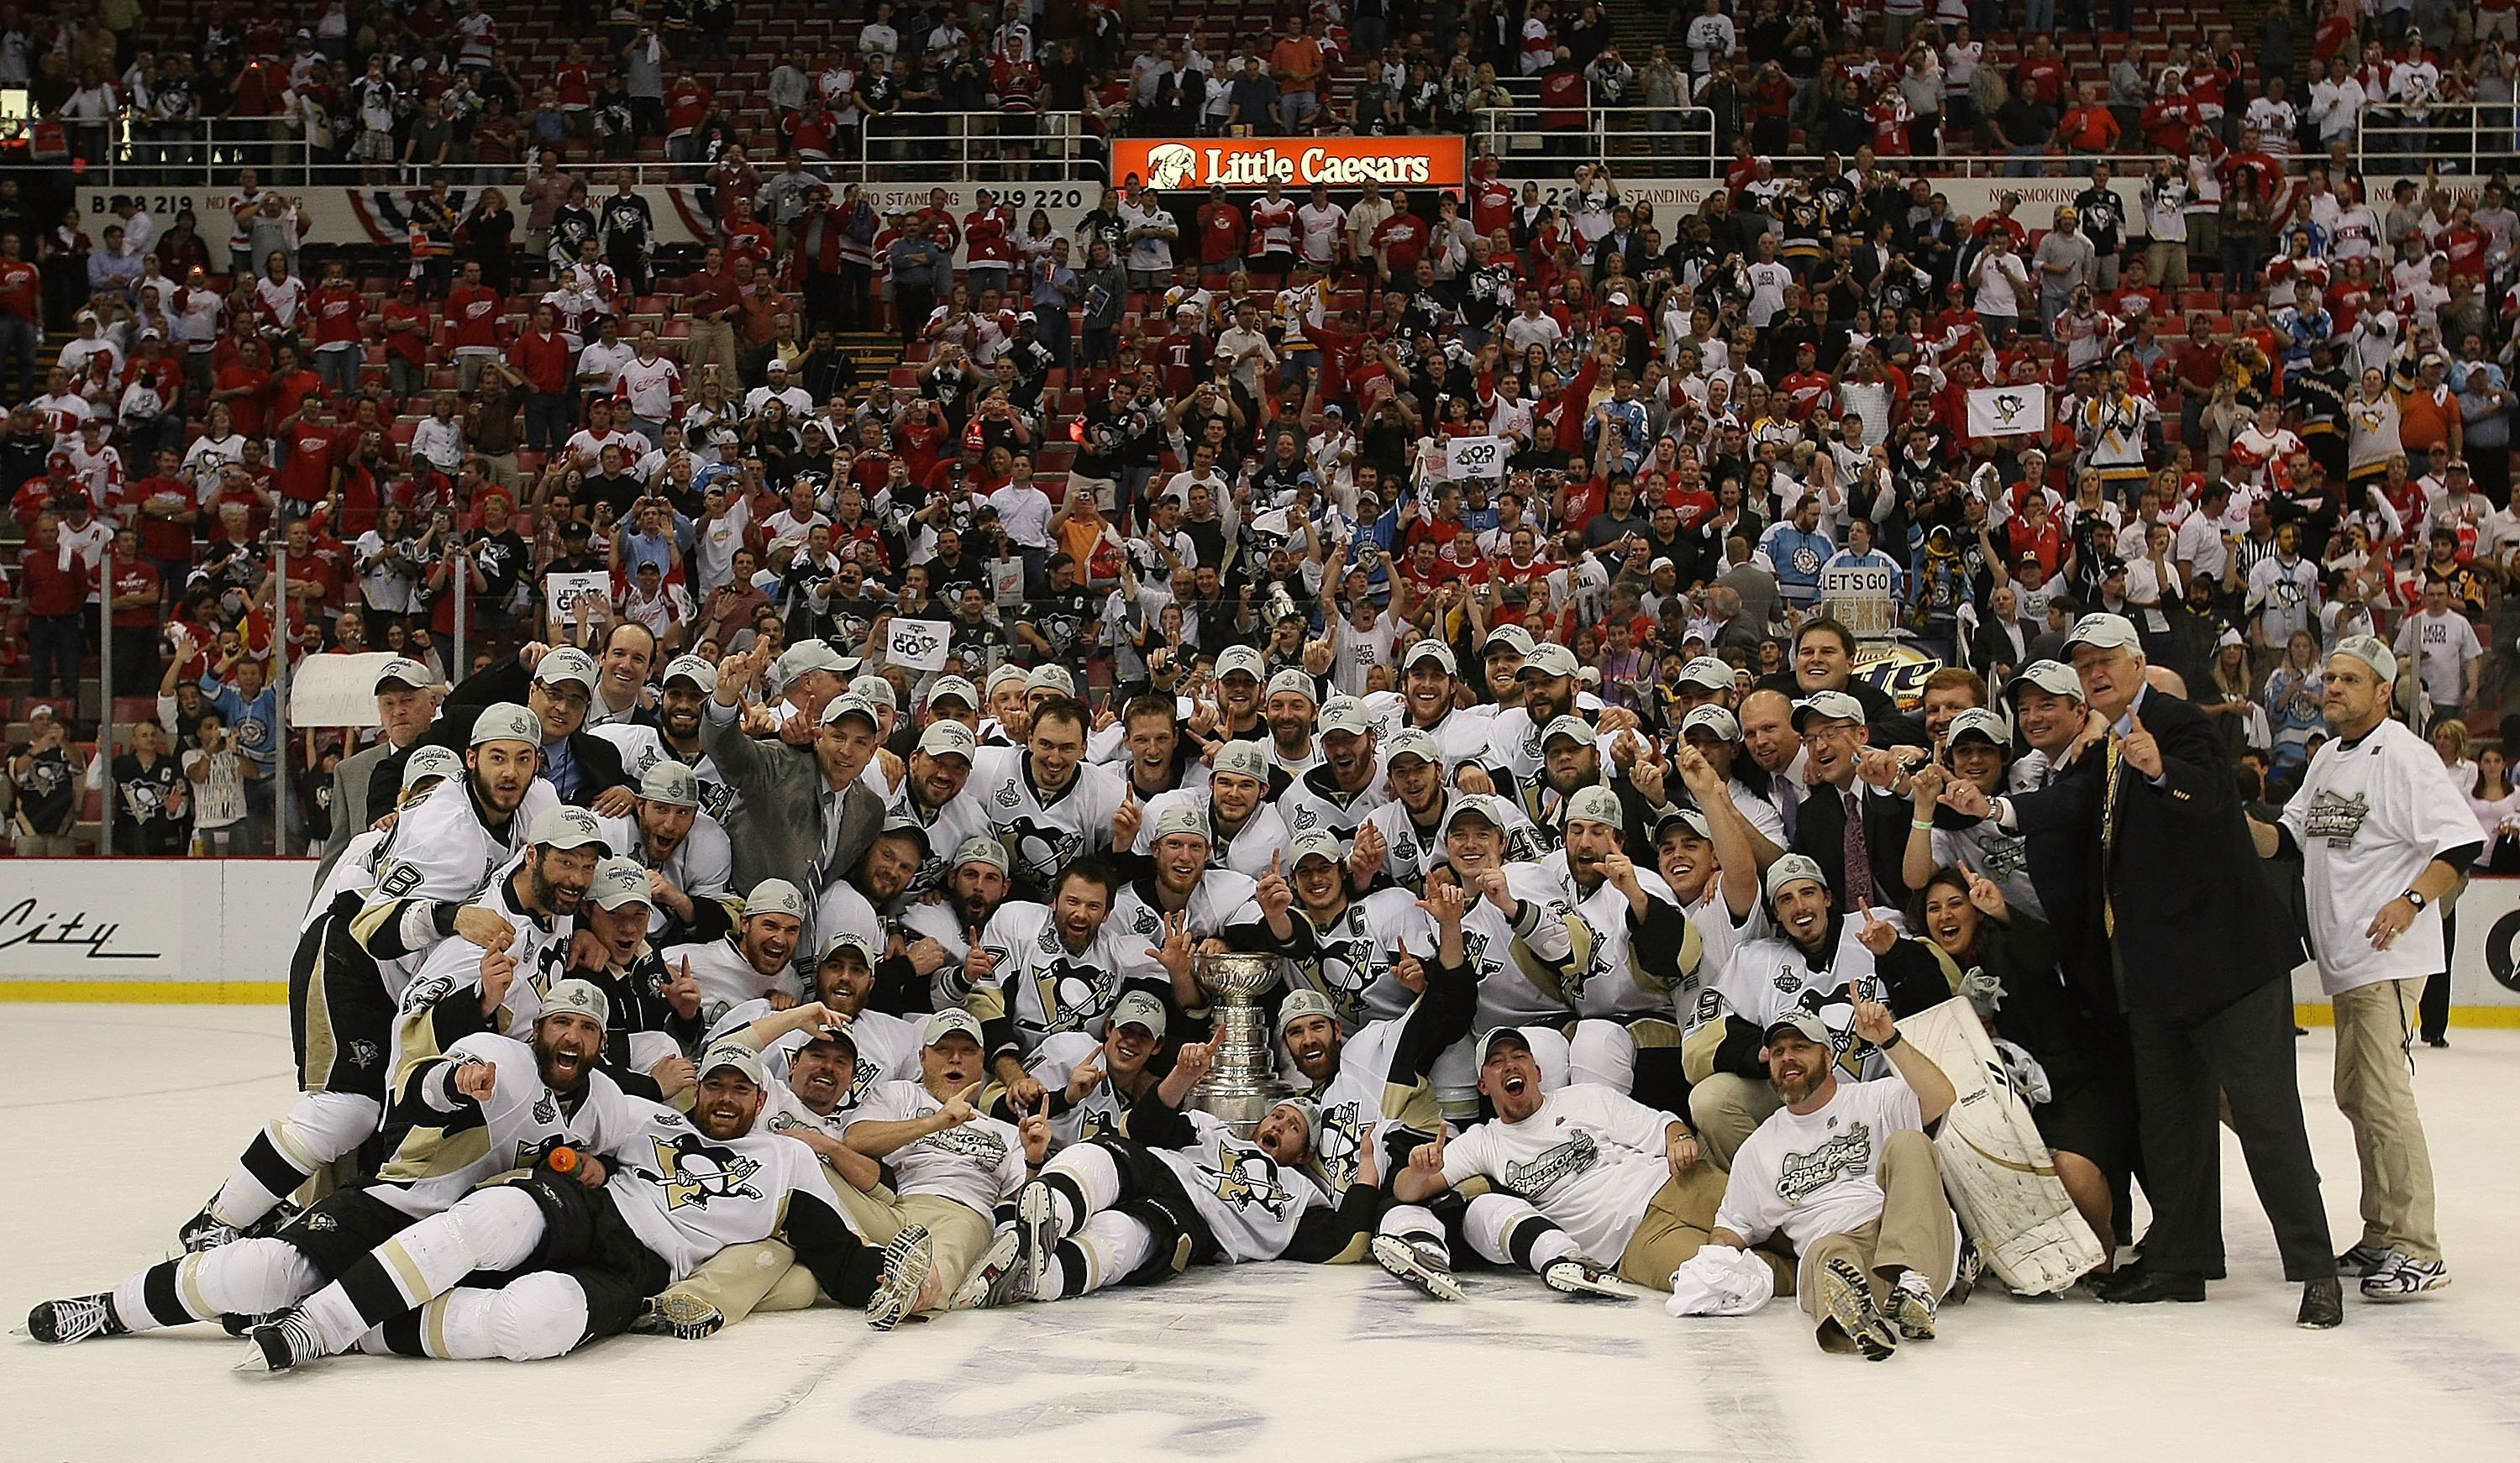 DETROIT - JUNE 12:  The Pittsburgh Penguins pose with the Stanley Cup following the Penguins victory over the Detroit Red Wings in Game Seven of the 2009 NHL Stanley Cup Finals at Joe Louis Arena on June 12, 2009 in Detroit, Michigan.  (Photo by Bruce Ben